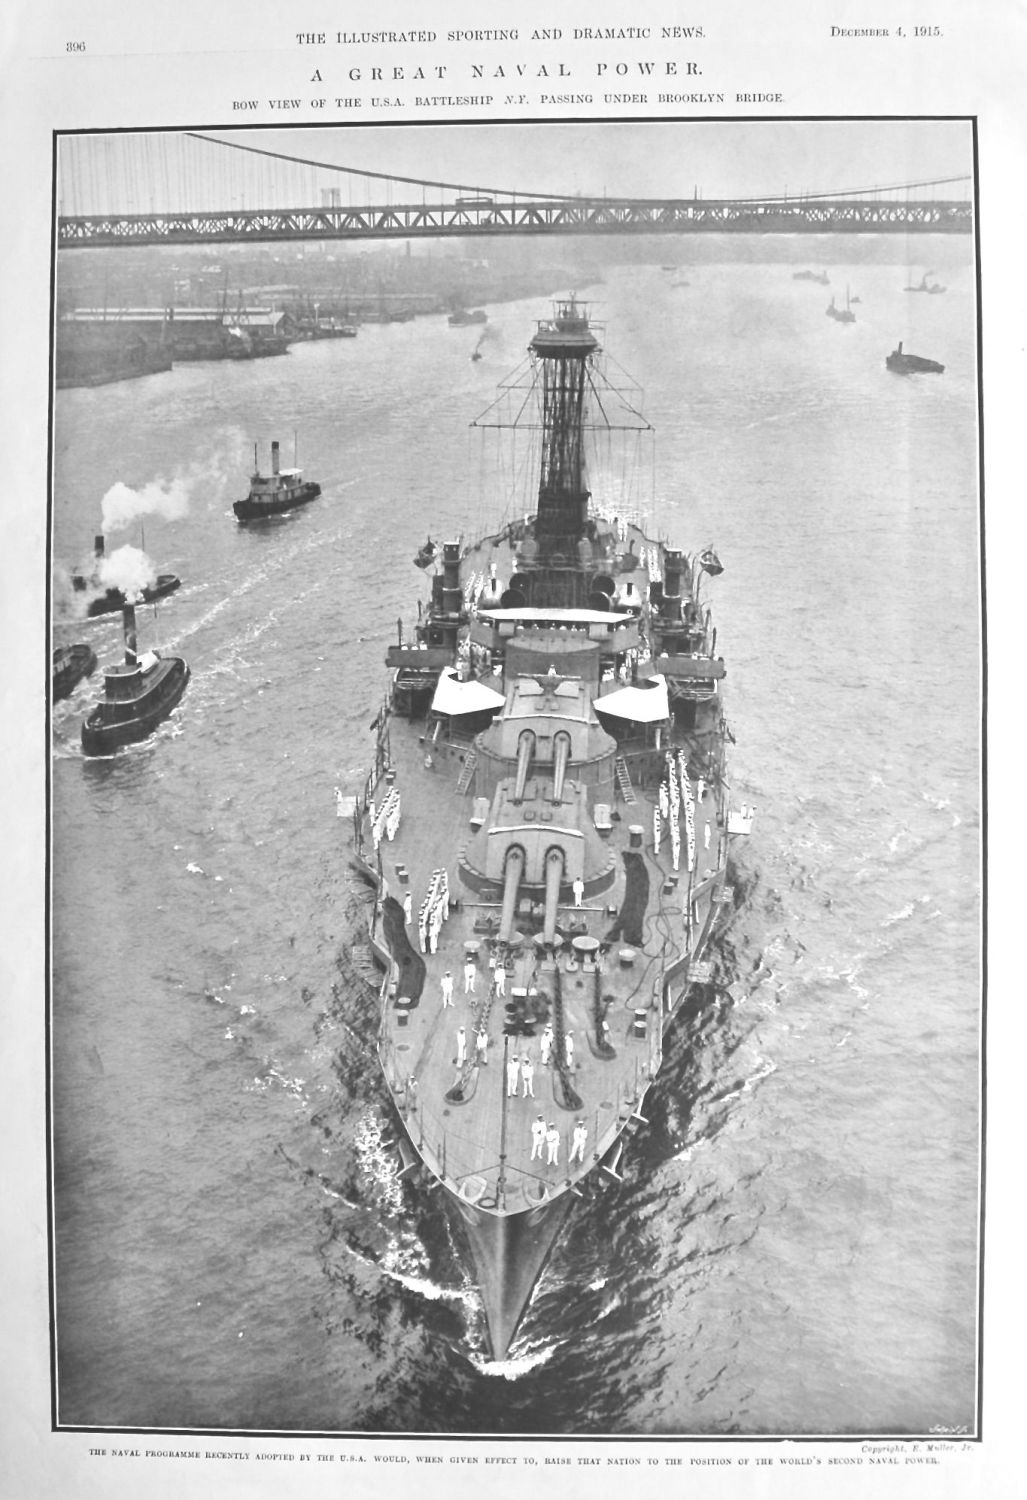 A Great Naval Power : Bow View of the U.S.A. Battleship N.Y.  Passing under